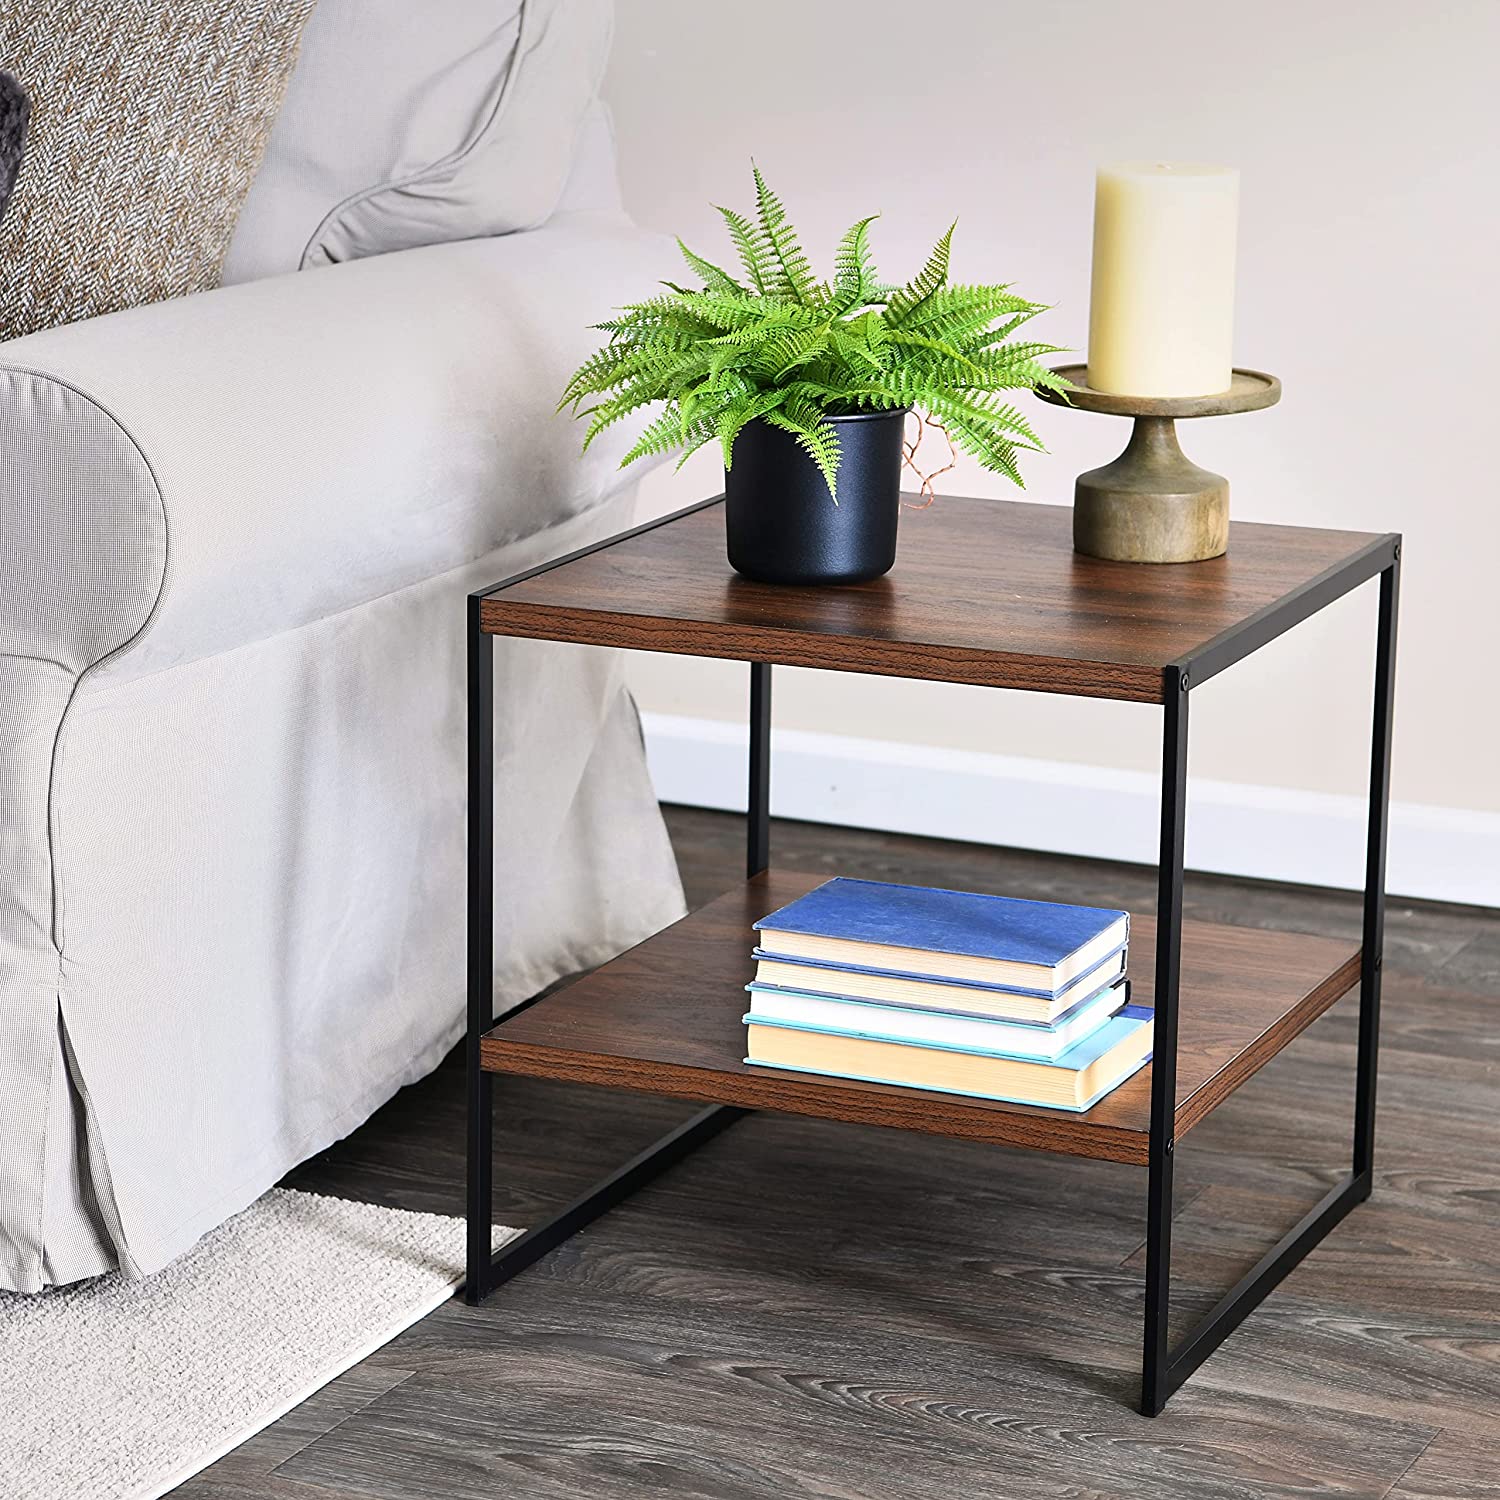 The Side Table - waseeh.com